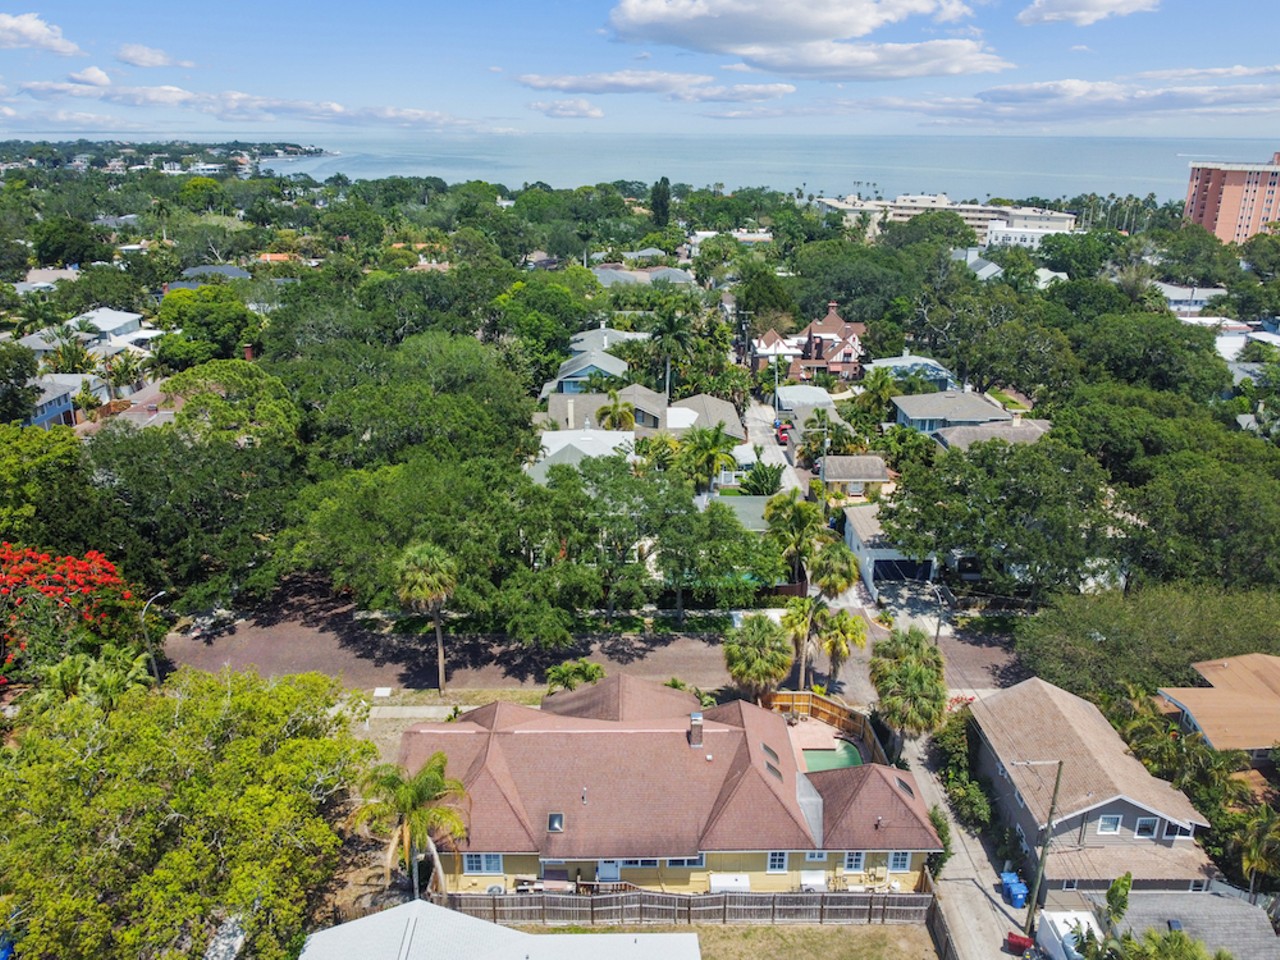 The former St. Pete home of 'Shutter Island' and 'Mystic River' author Dennis Lehane is now for sale